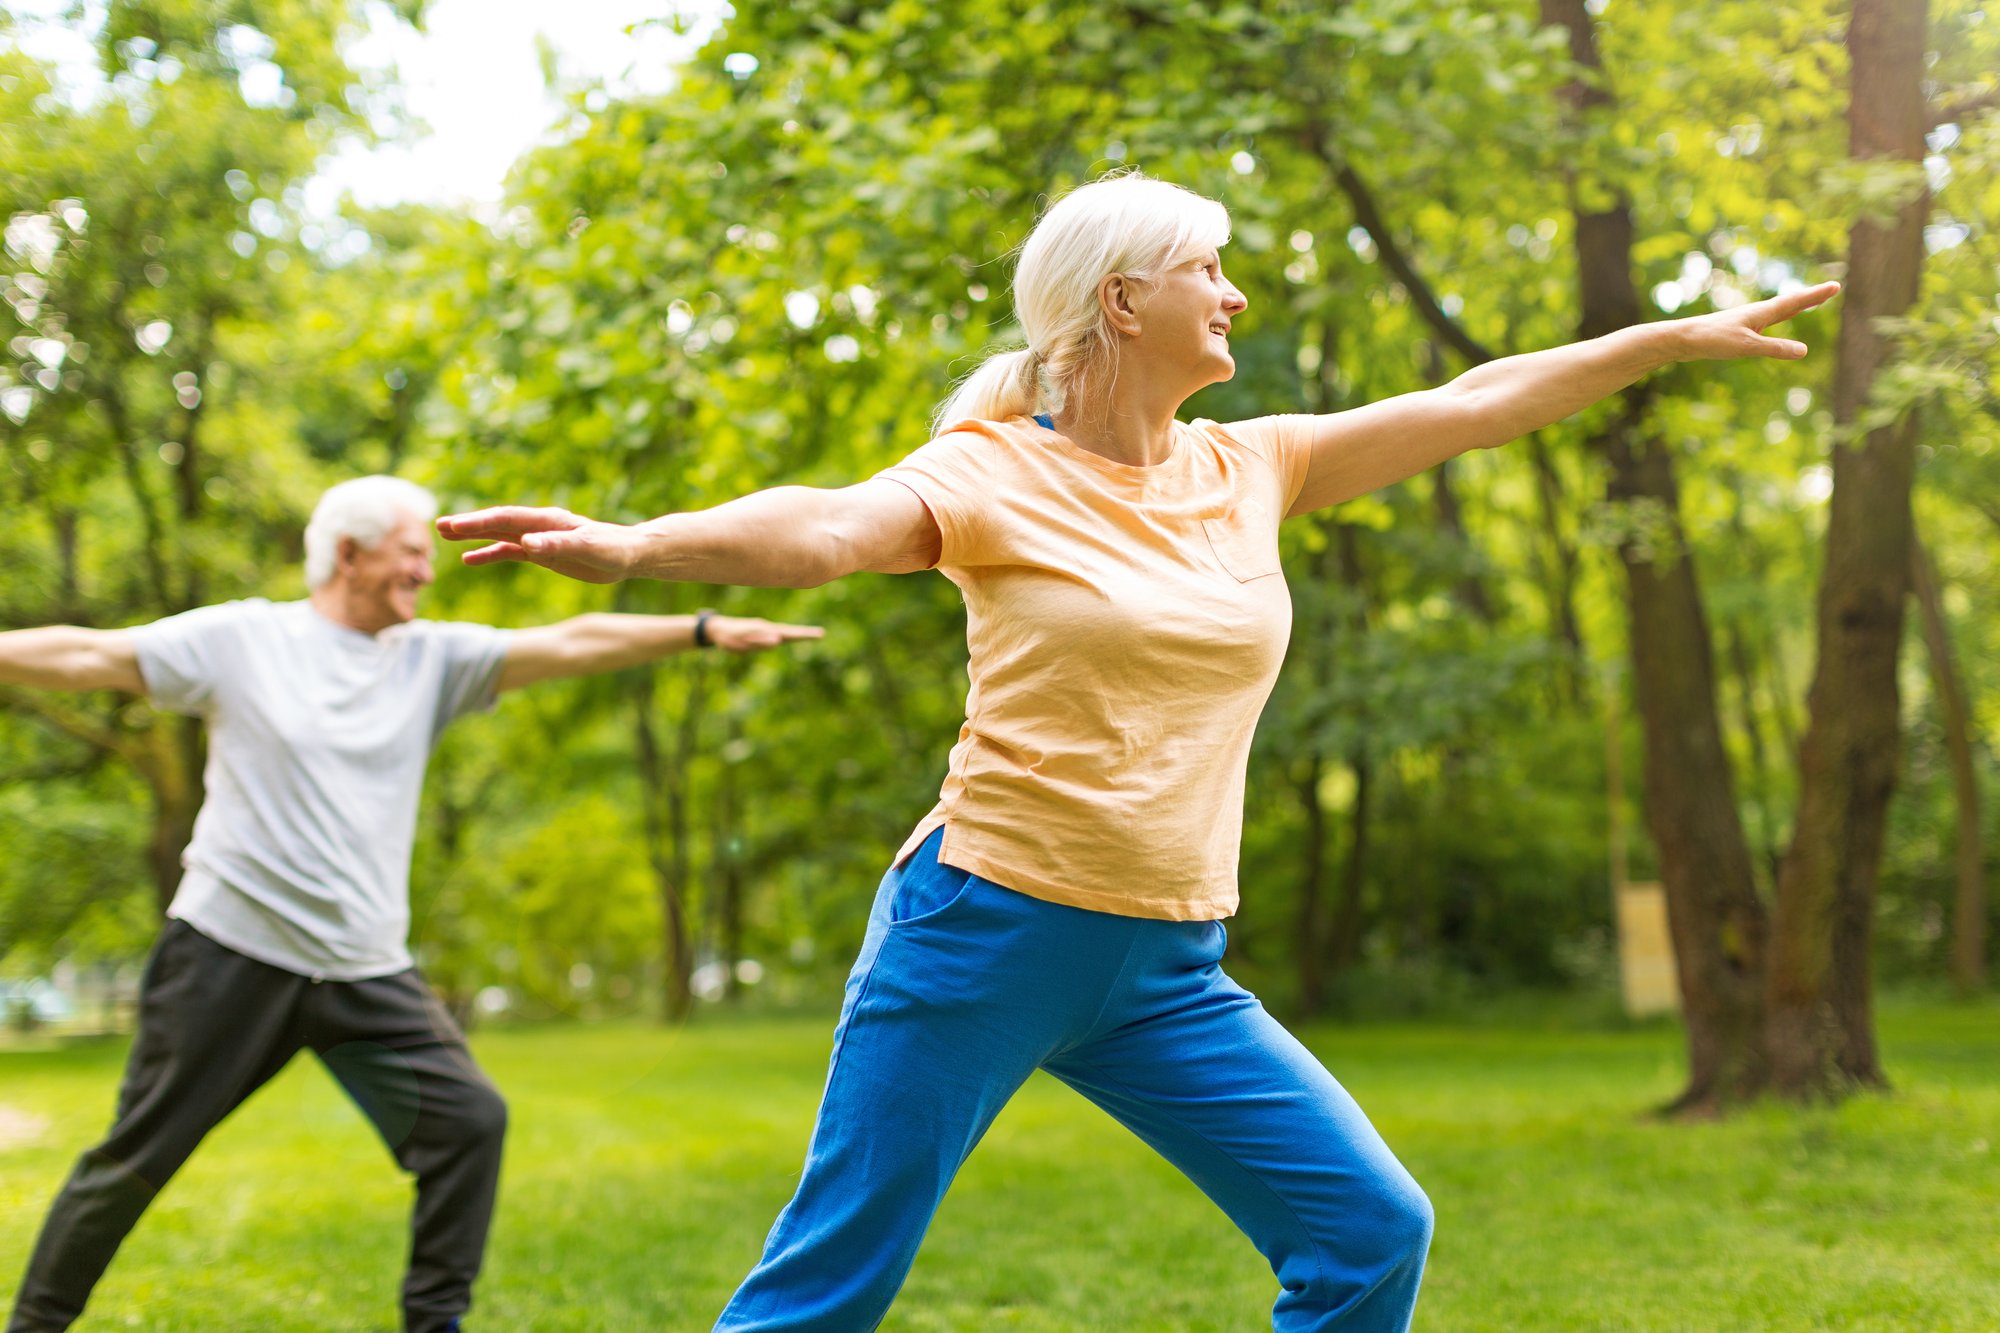 Elderly couple doing yoga in the park to increase their gut health through hormone balancing therapies.